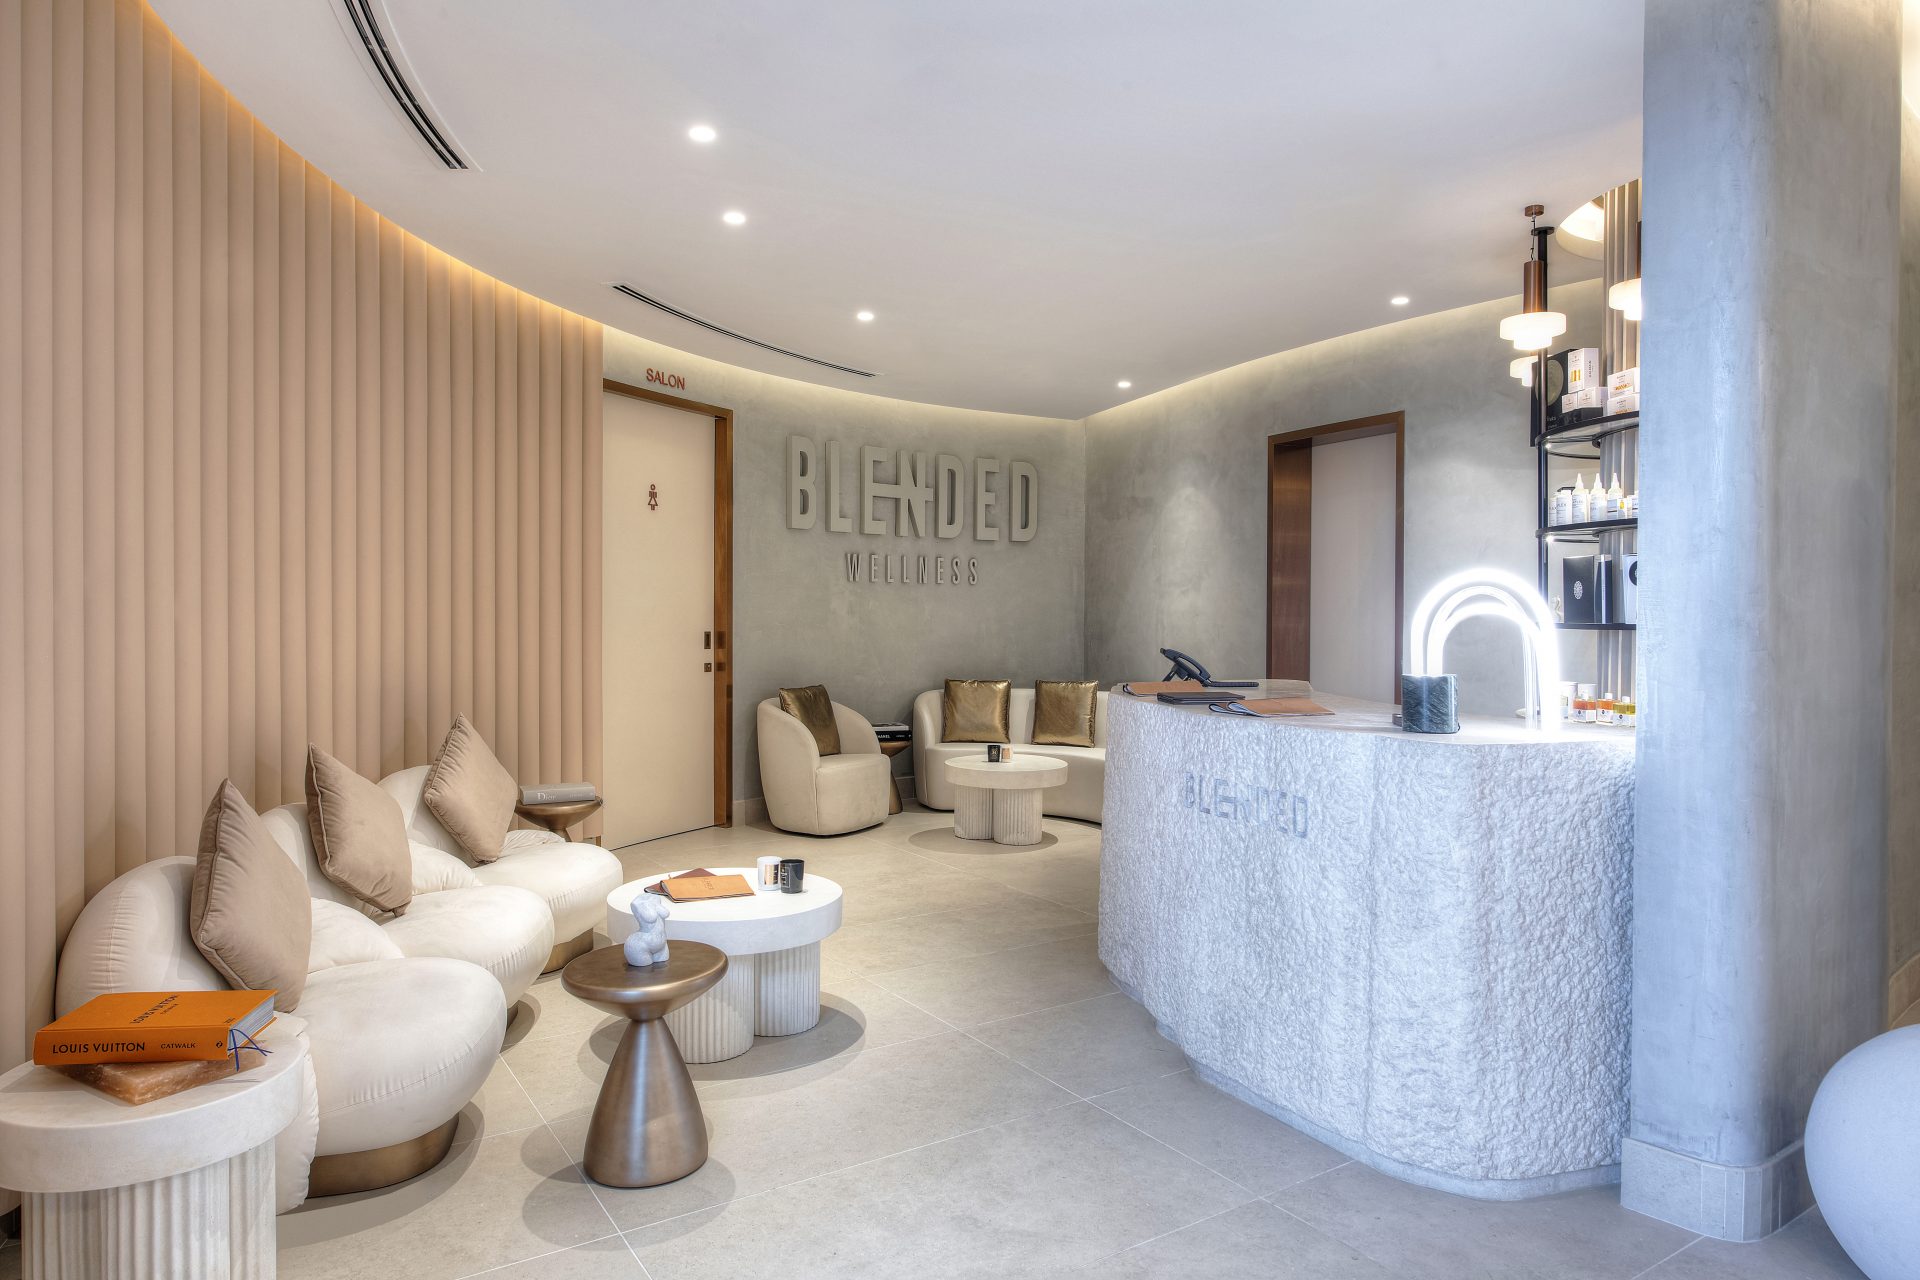 Blended Wellness in Dubai by Bishop Design is a modern day super spa